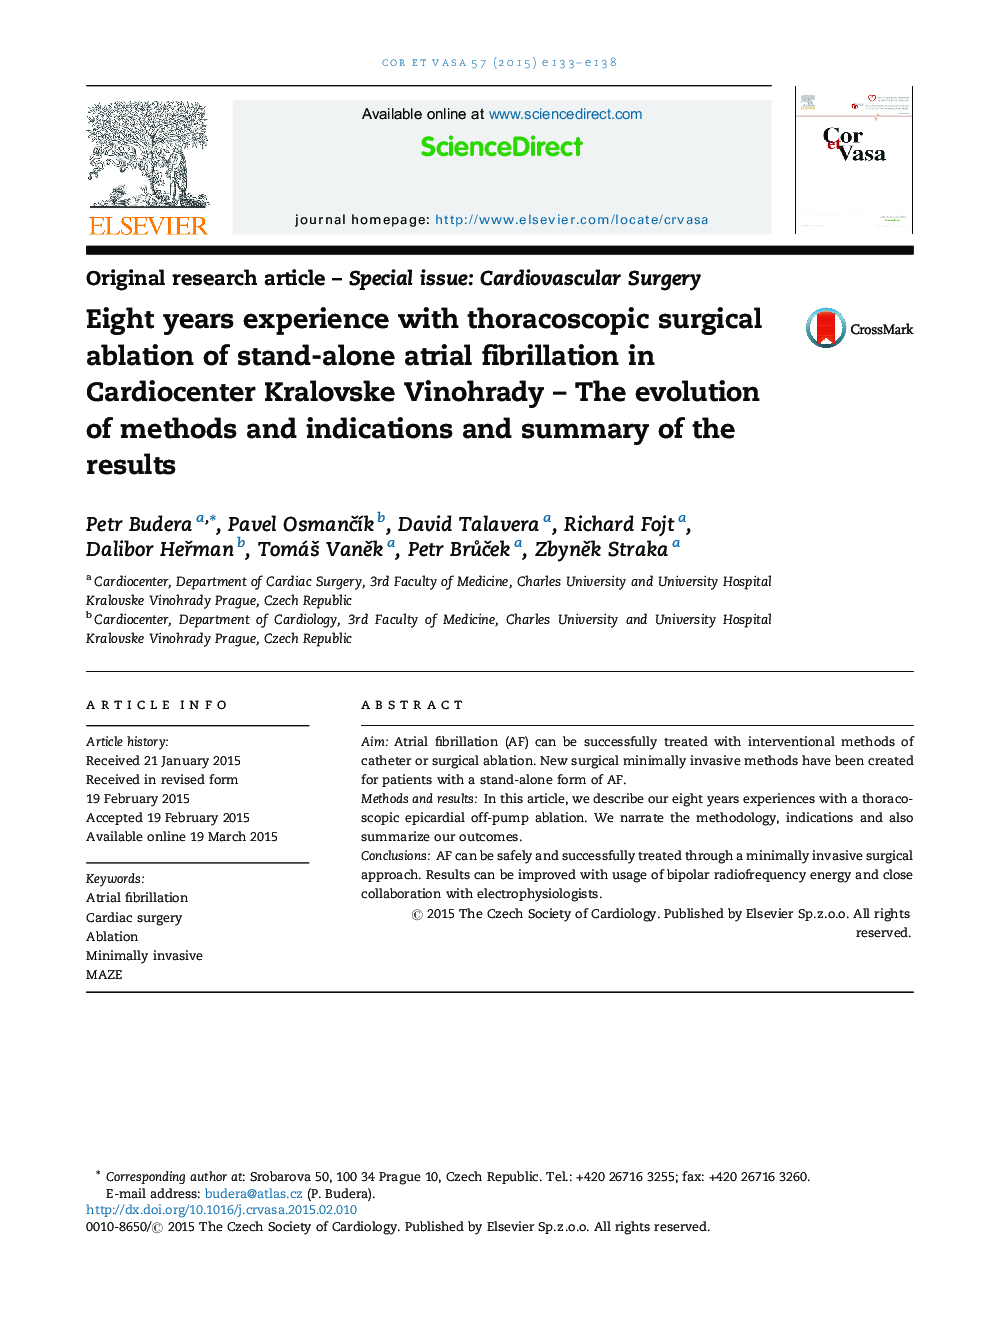 Eight years experience with thoracoscopic surgical ablation of stand-alone atrial fibrillation in Cardiocenter Kralovske Vinohrady – The evolution of methods and indications and summary of the results